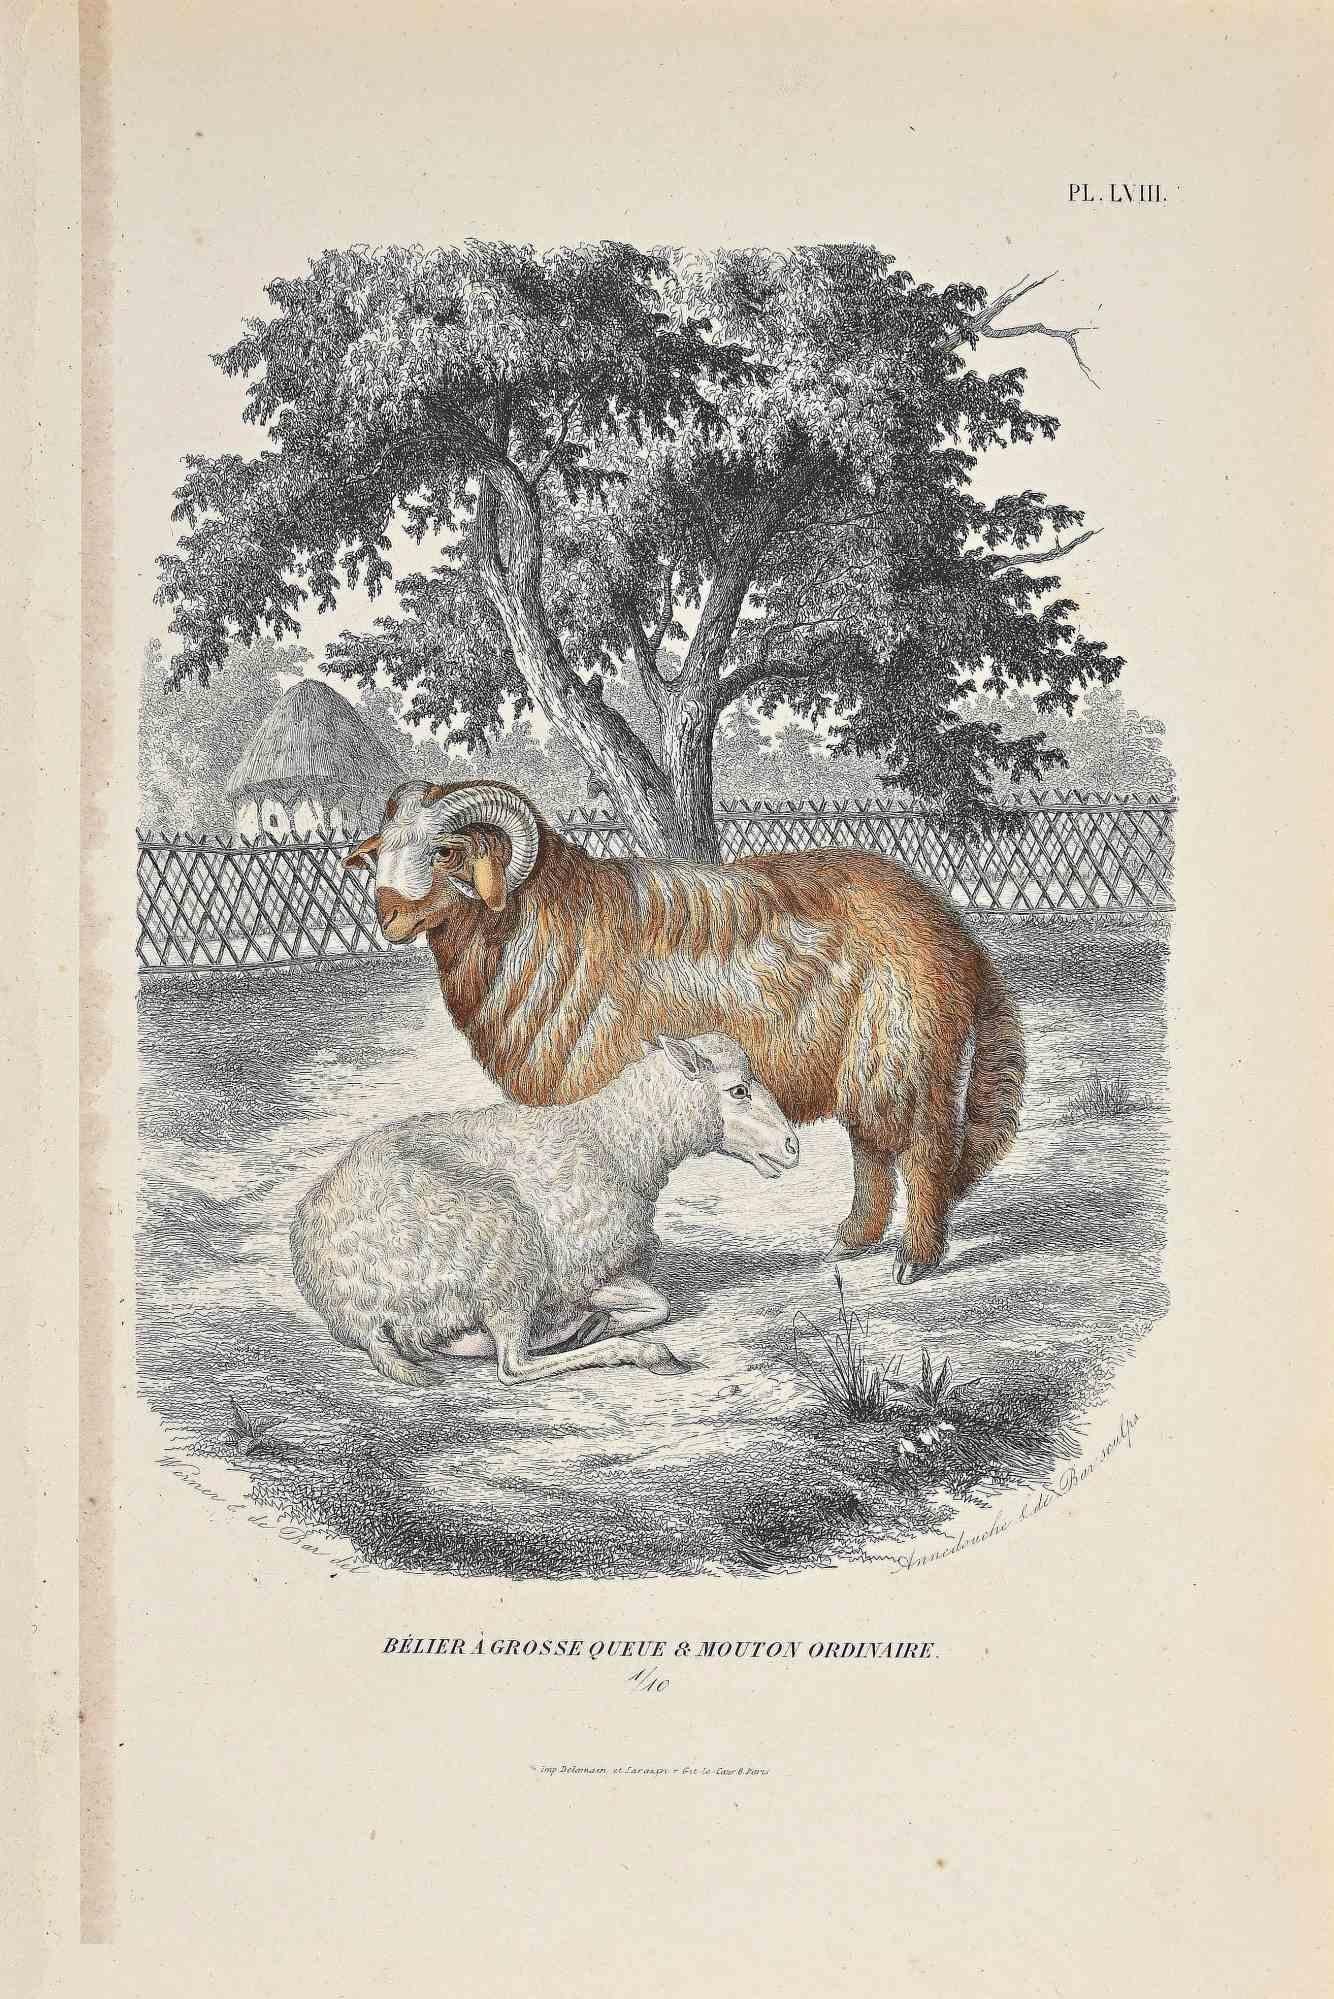 The Ram And Sheep is an original colored lithograph on ivory-colored paper, realized by Paul Gervais (1816-1879). The artwork is from The Series of "Les Trois Règnes de la Nature", and was published in 1854.

Good conditions with minor